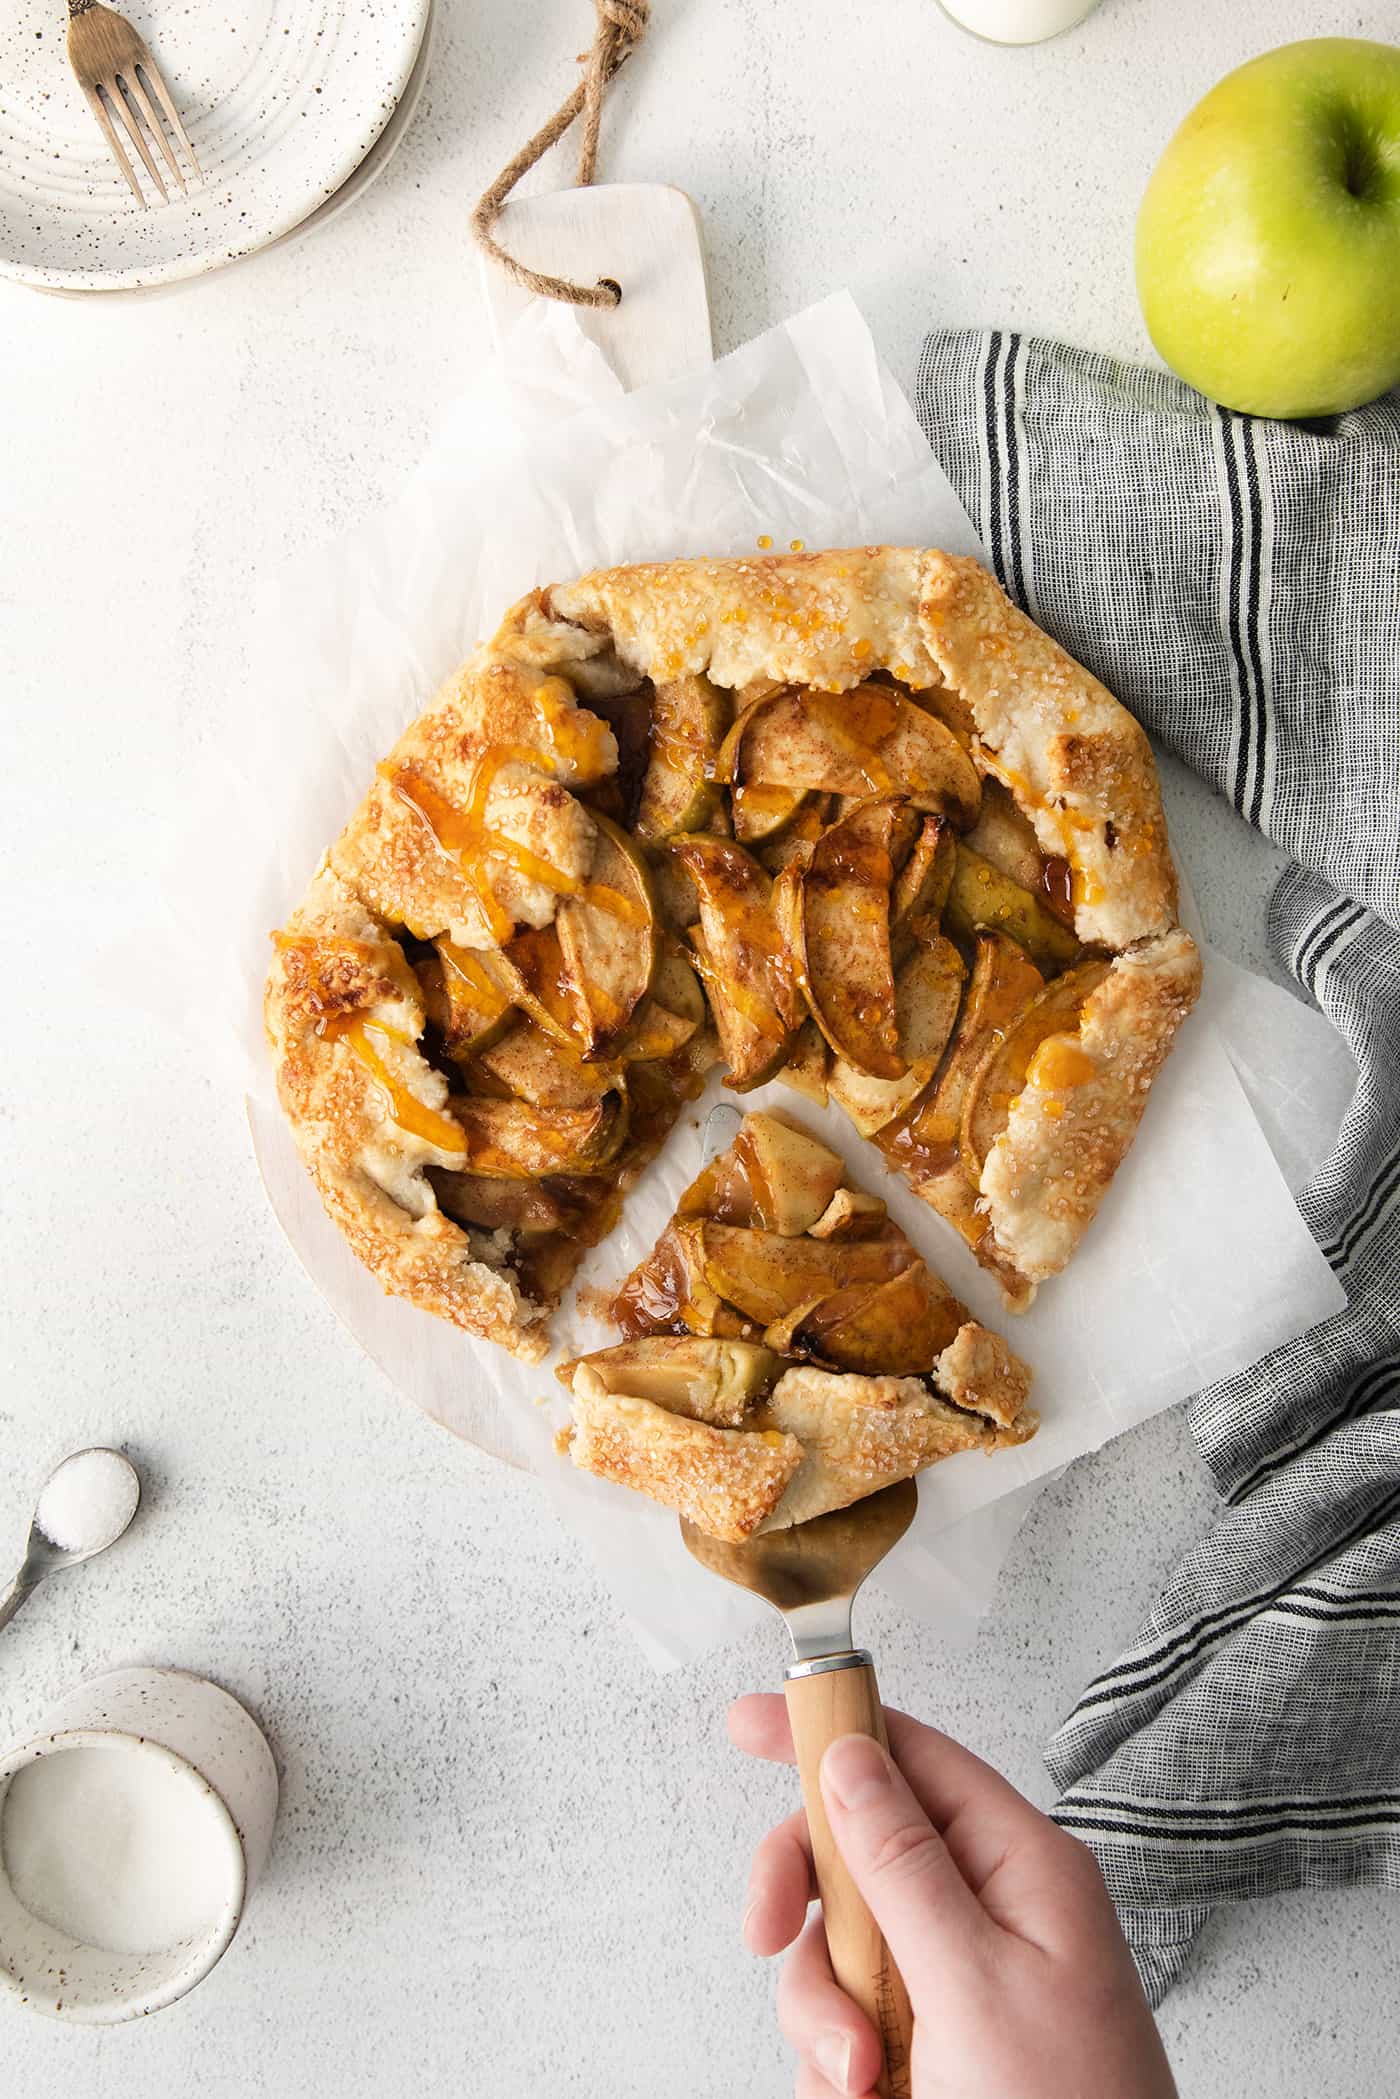 Overhead view of a slice of almond apple galette being served